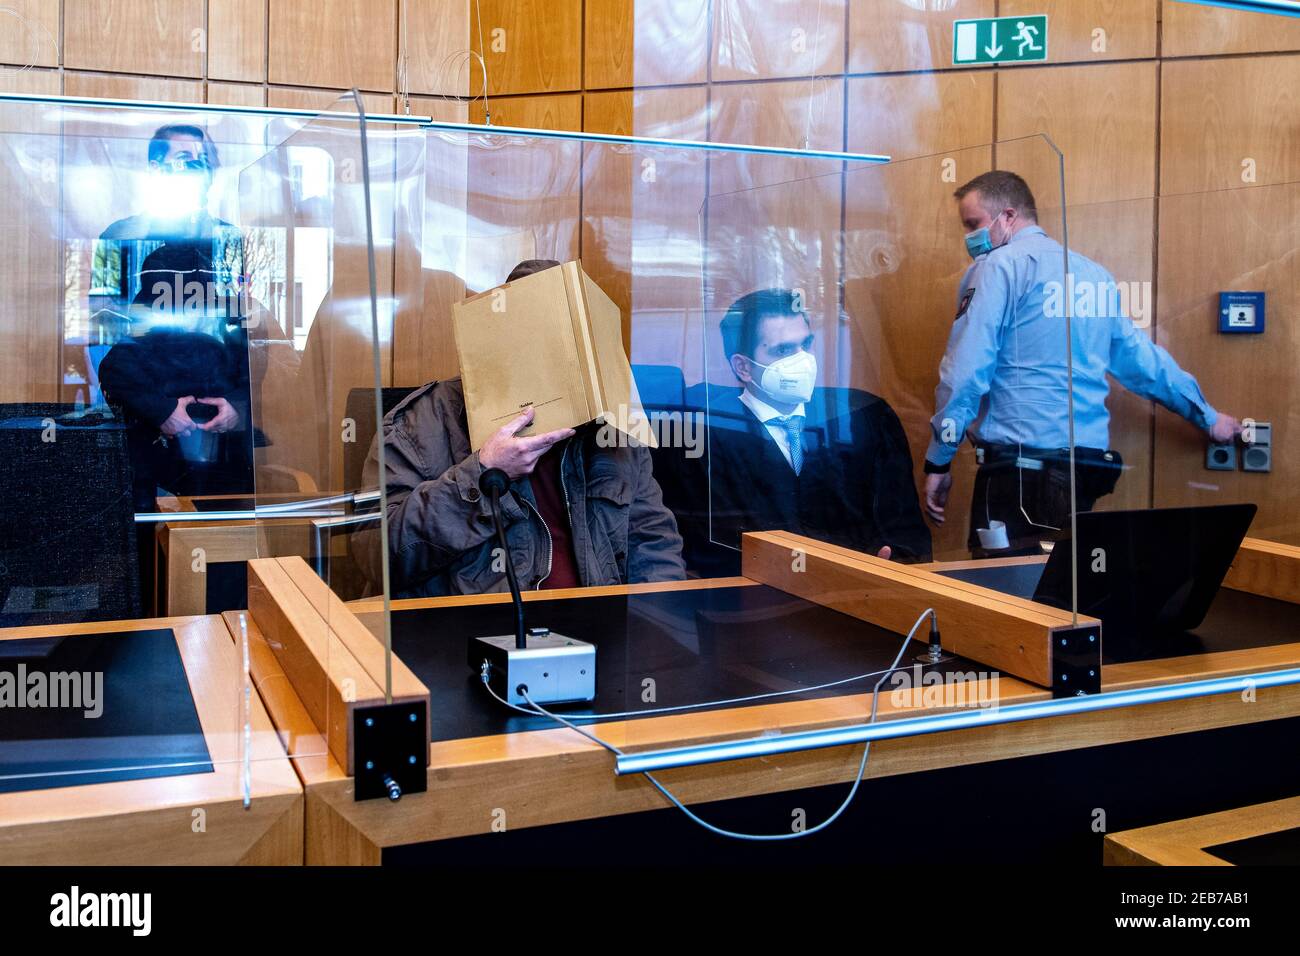 12 February 2021, North Rhine-Westphalia, Münster: The 50-year-old defendant (M) from Hanover sits with a file in front of his face in the Münster abuse complex before the pronouncement of the verdict in a room at Münster Regional Court next to his lawyer Erkan Görgülü (2nd from right). He is alleged to have severely sexually abused the foster son of the 27-year-old main defendant in the fall of 2019 in an apartment at his residence. Further trials in the matter are pending at Münster Regional Court. Judgments are not expected here until the spring. Photo: Guido Kirchner/dpa Stock Photo